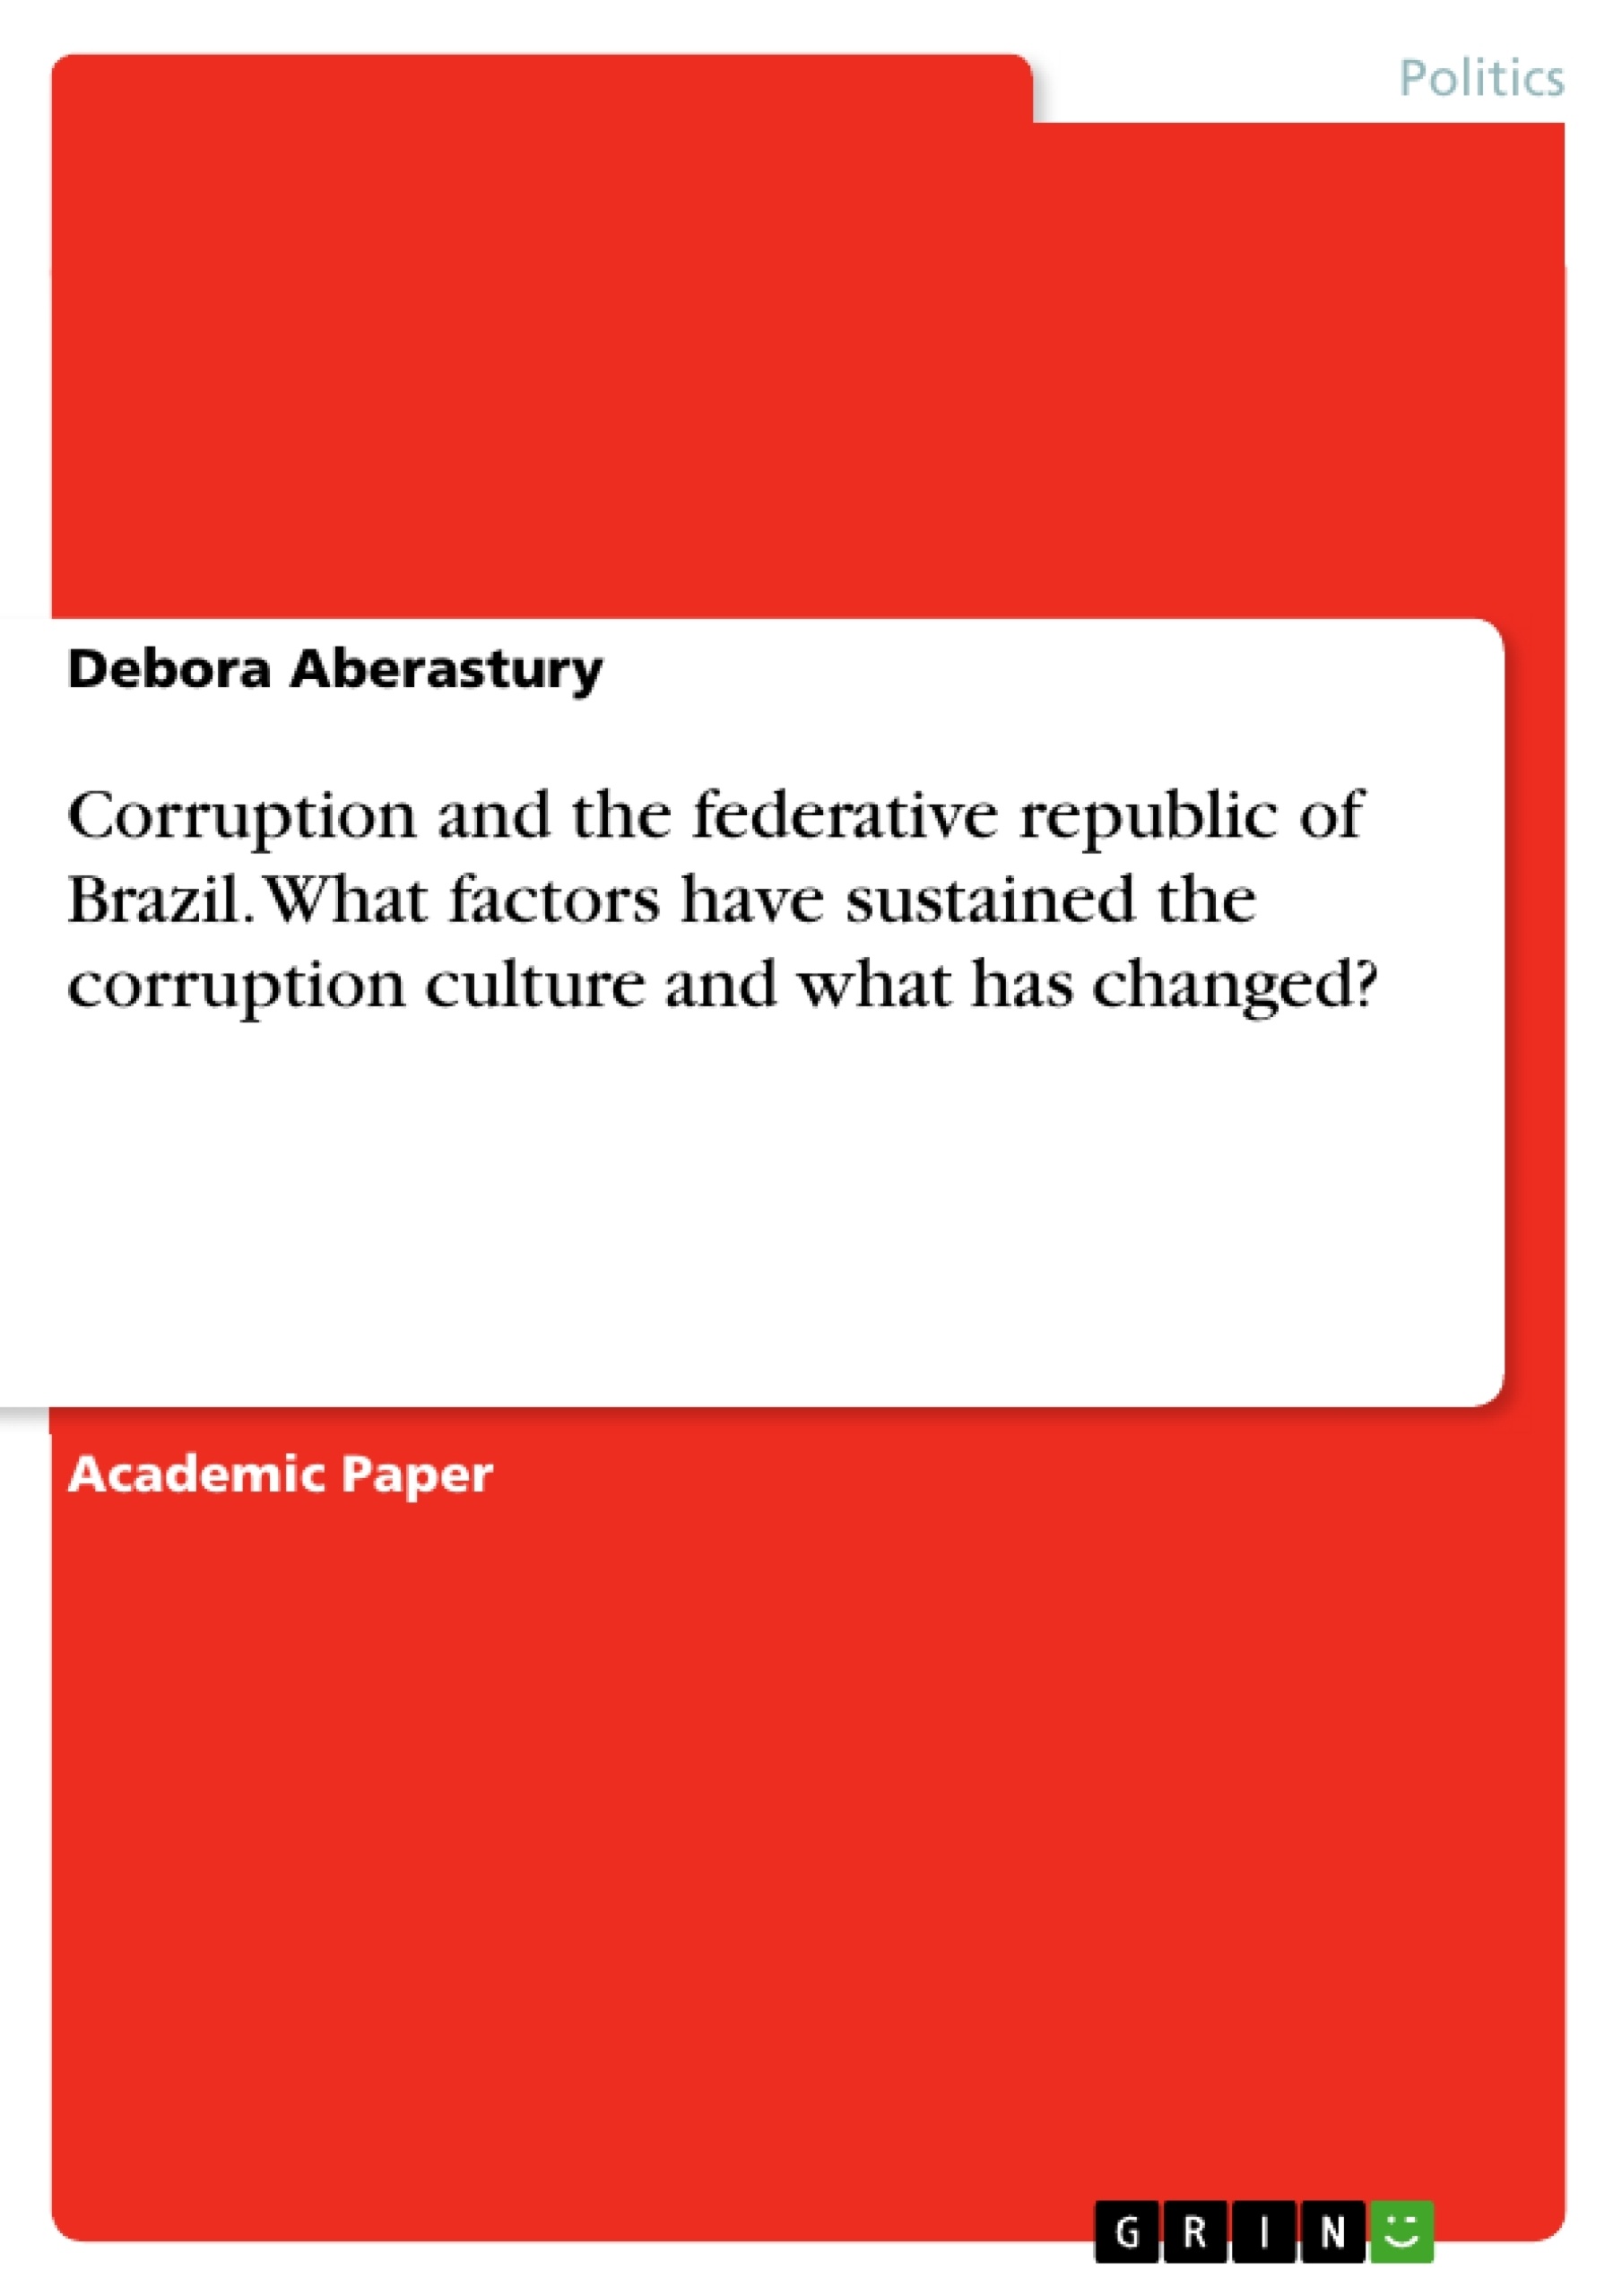 Título: Corruption and the federative republic of Brazil. What factors have sustained the corruption culture and what has changed?